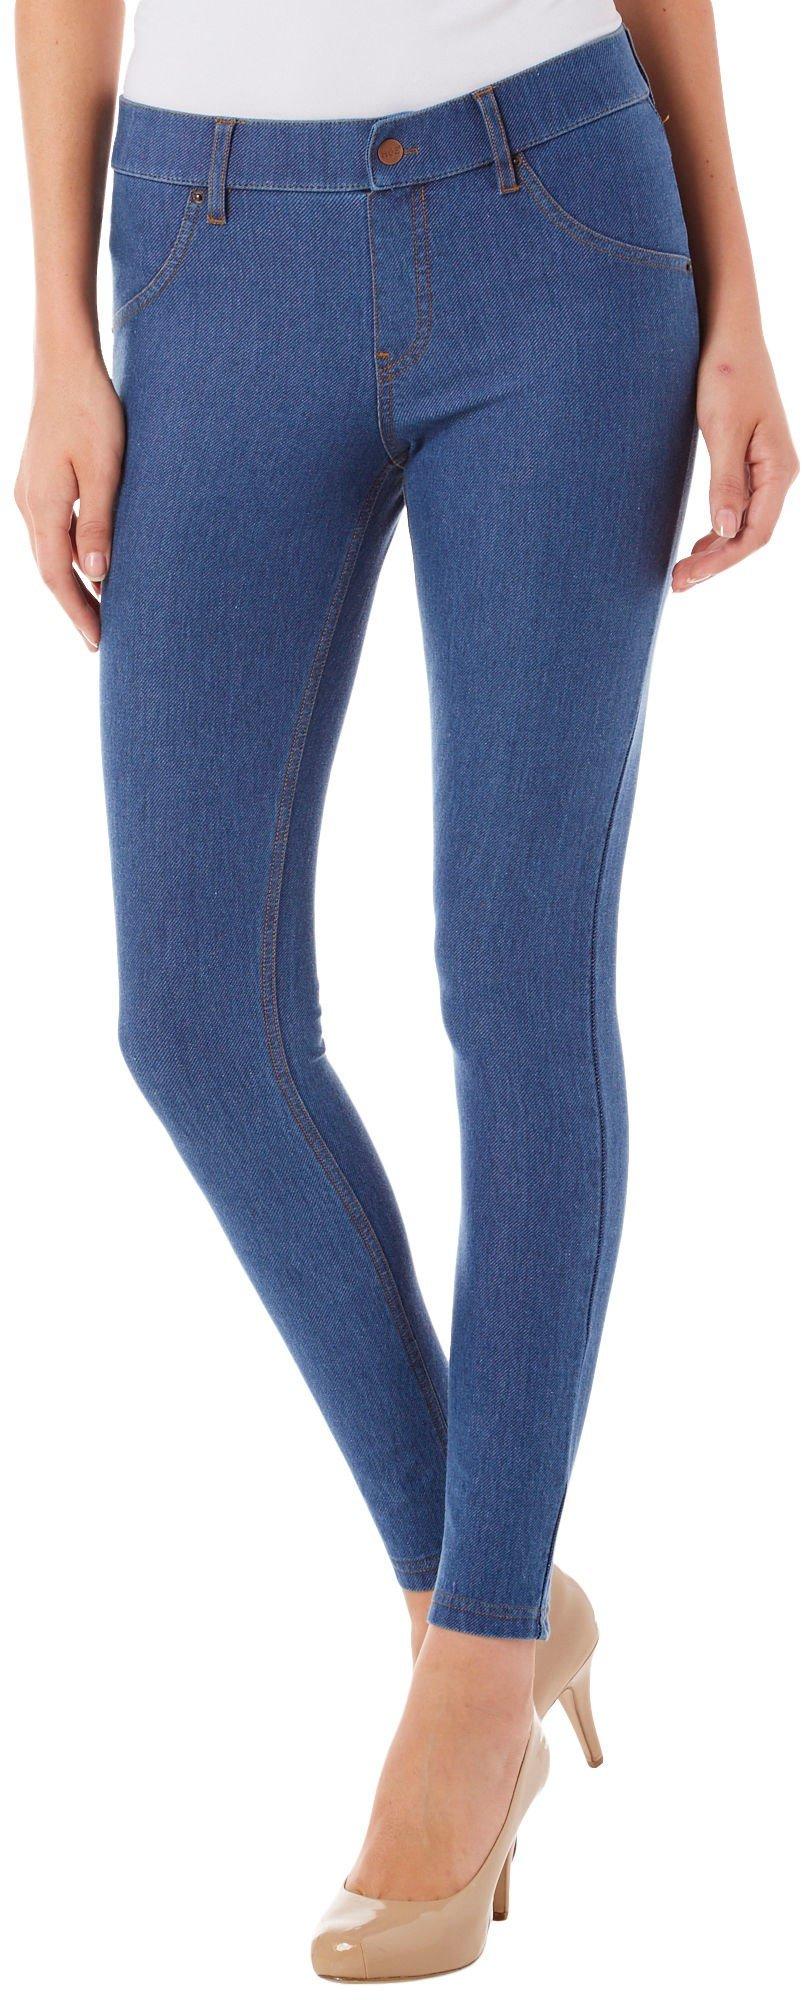 HUE Women's Essential Denim Leggings, Stone Acid Wash, X-Small : Buy Online  at Best Price in KSA - Souq is now : Fashion